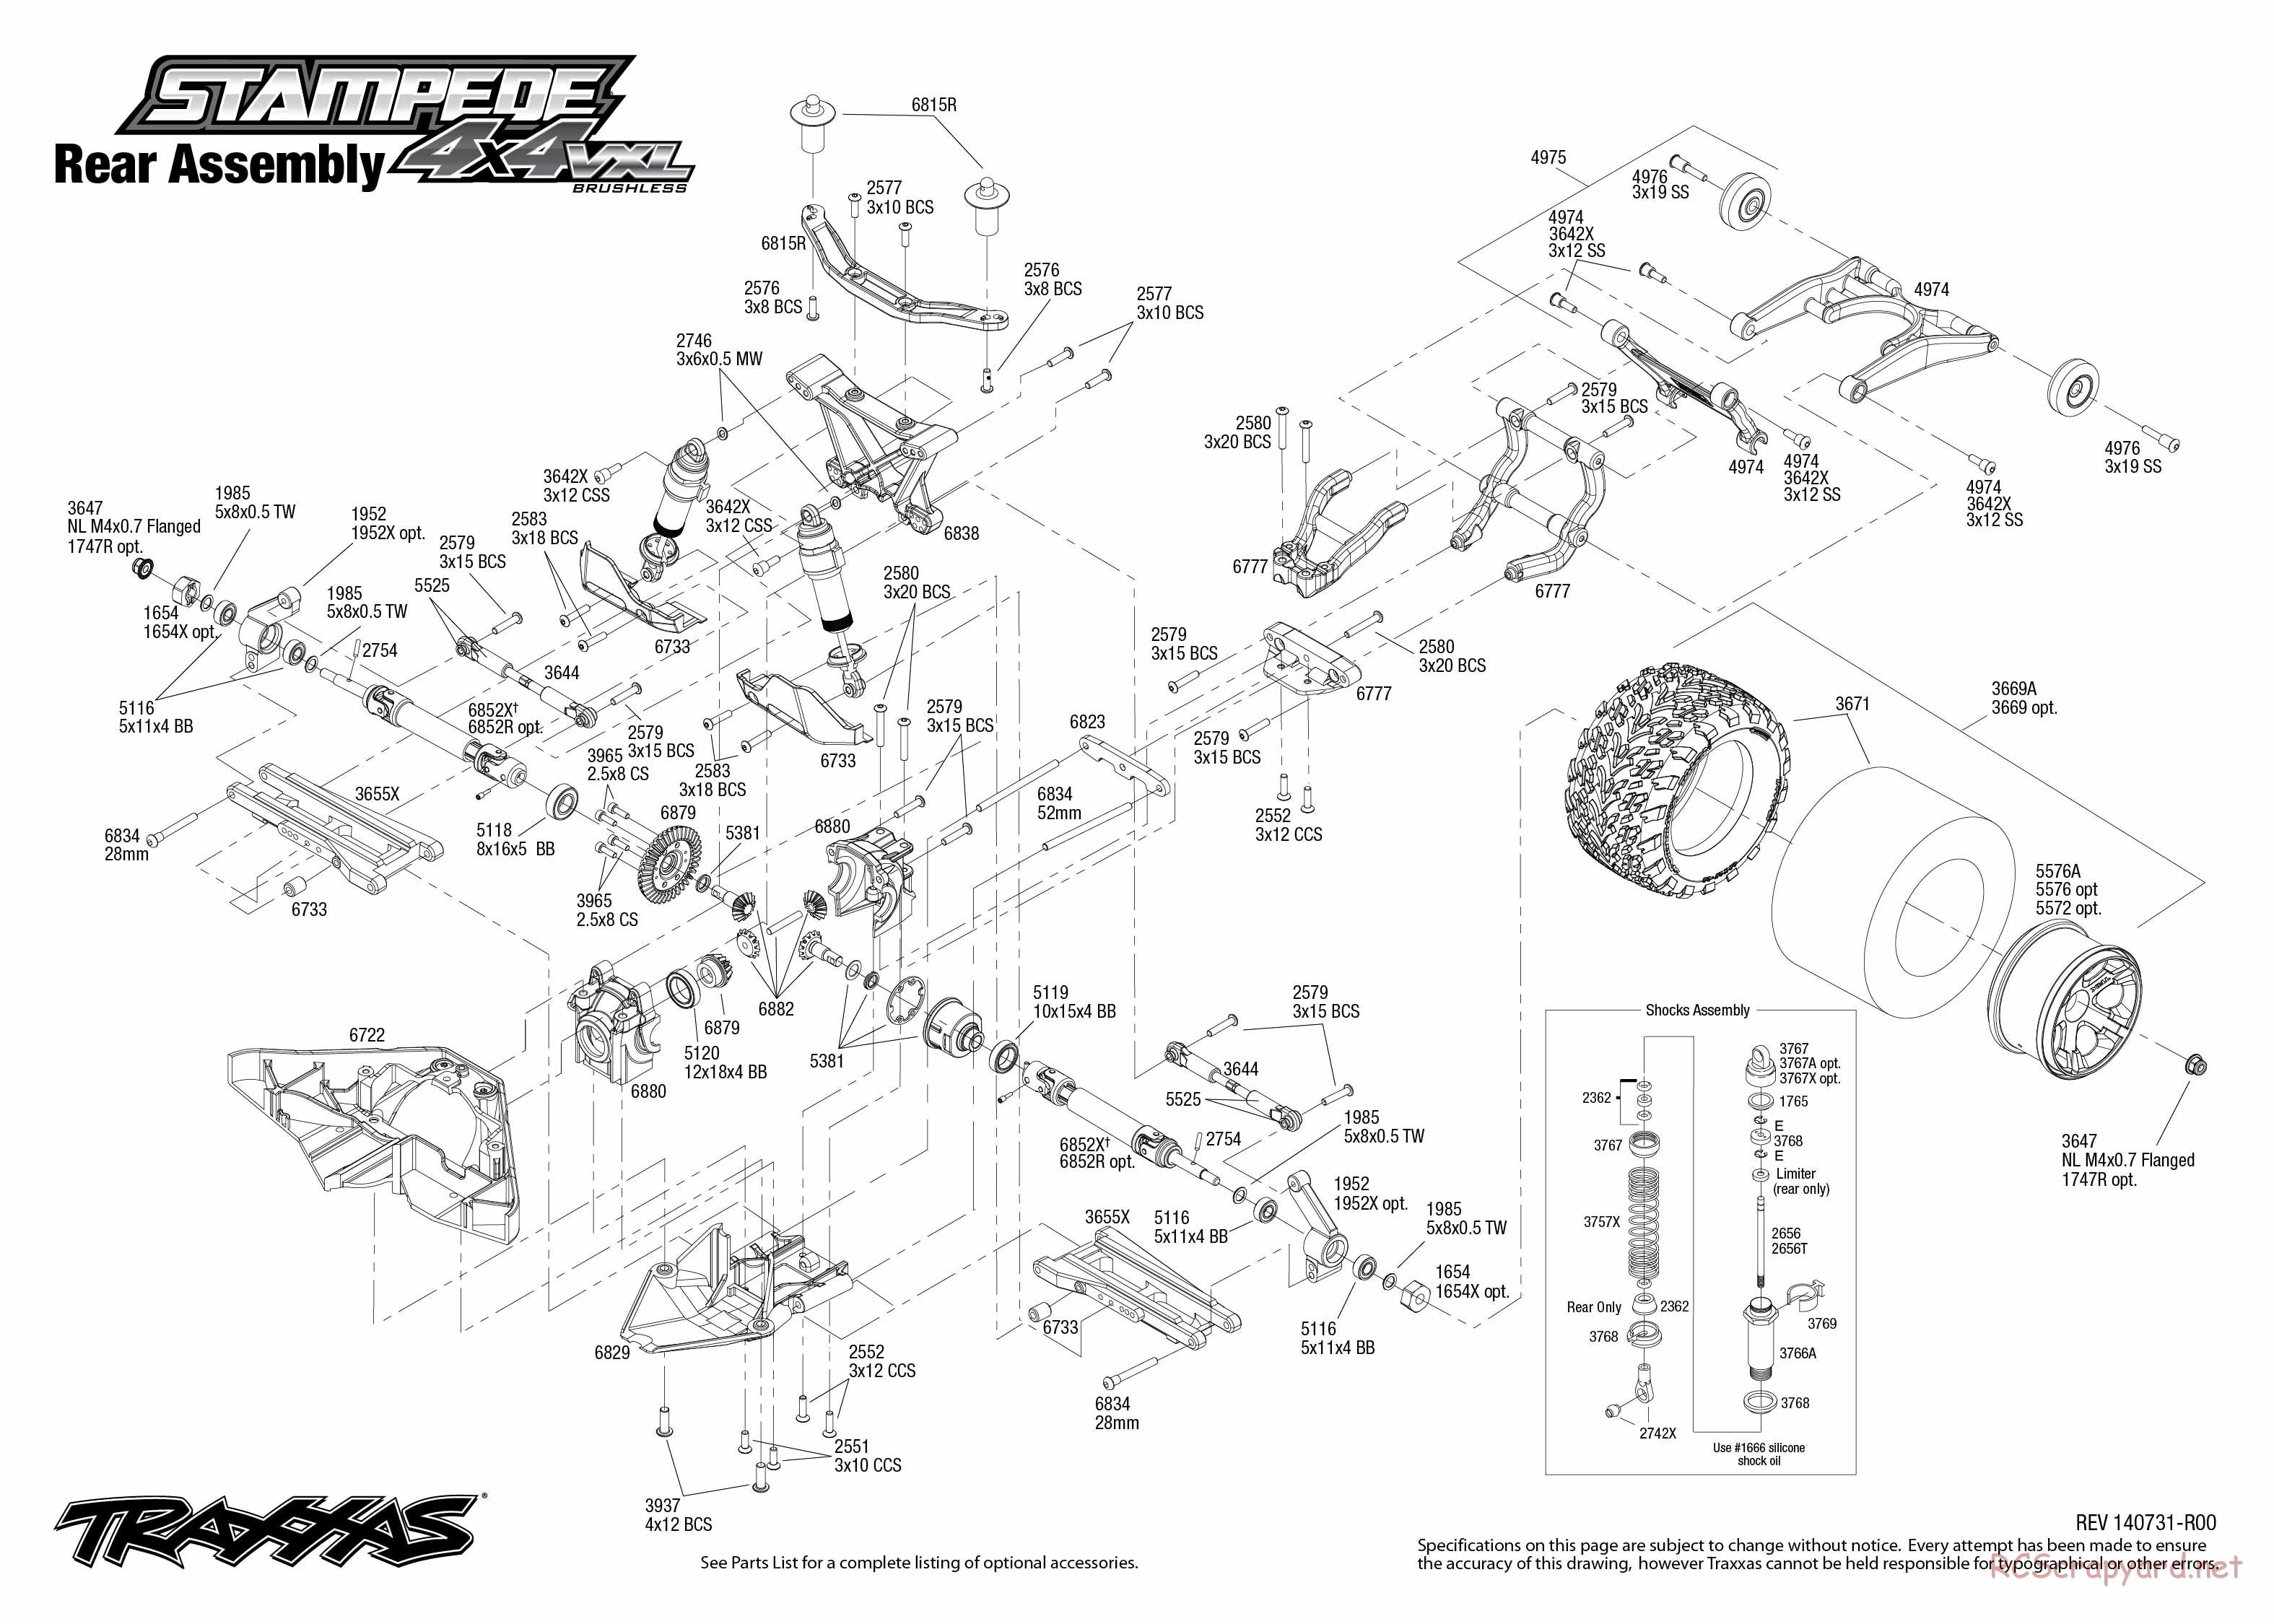 Traxxas - Stampede 4x4 VXL (2015) - Exploded Views - Page 3